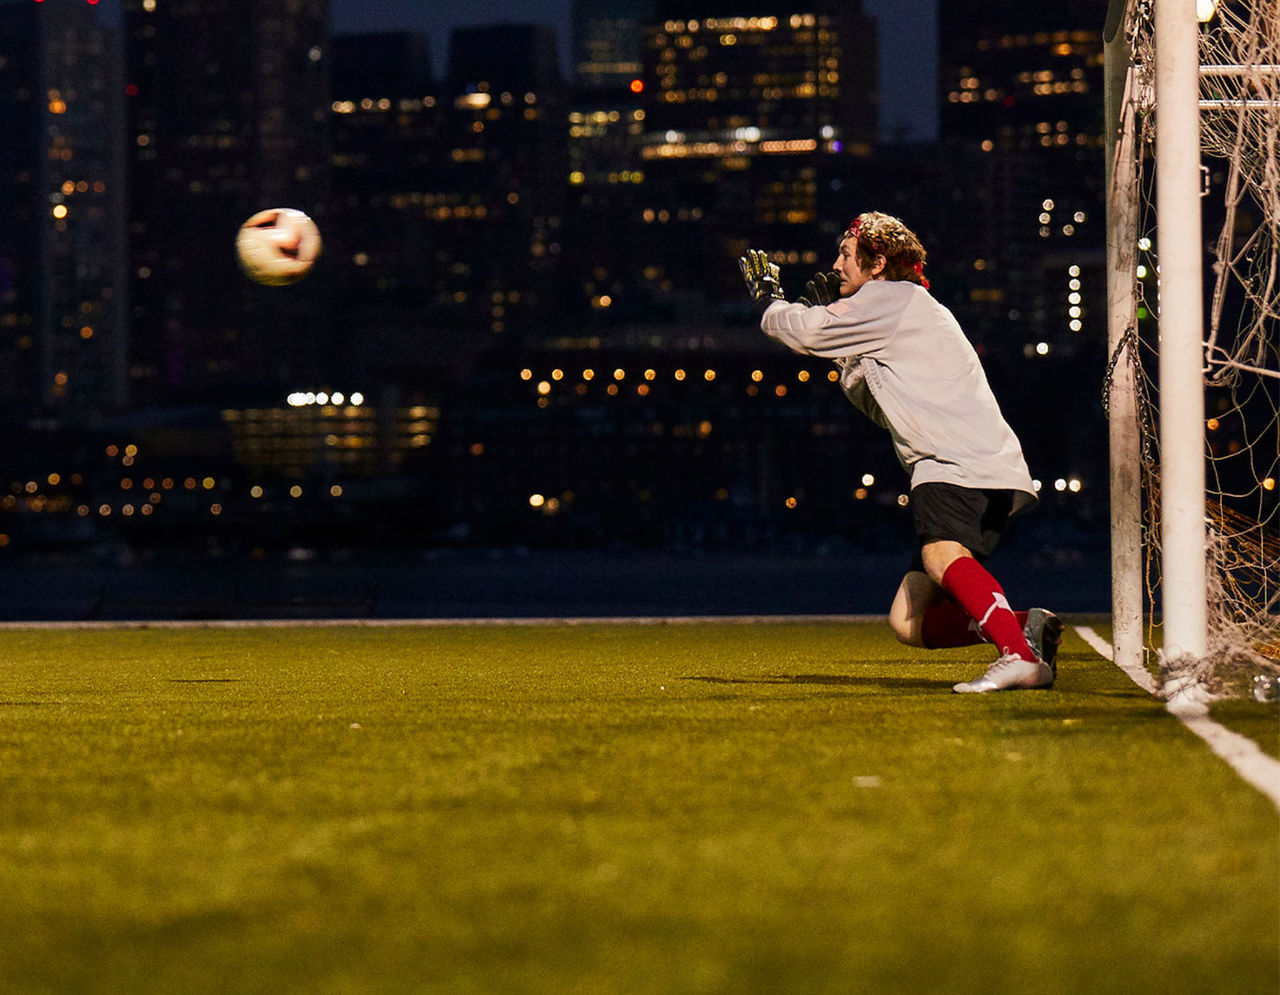 male goalie on field catching soccer ball at night